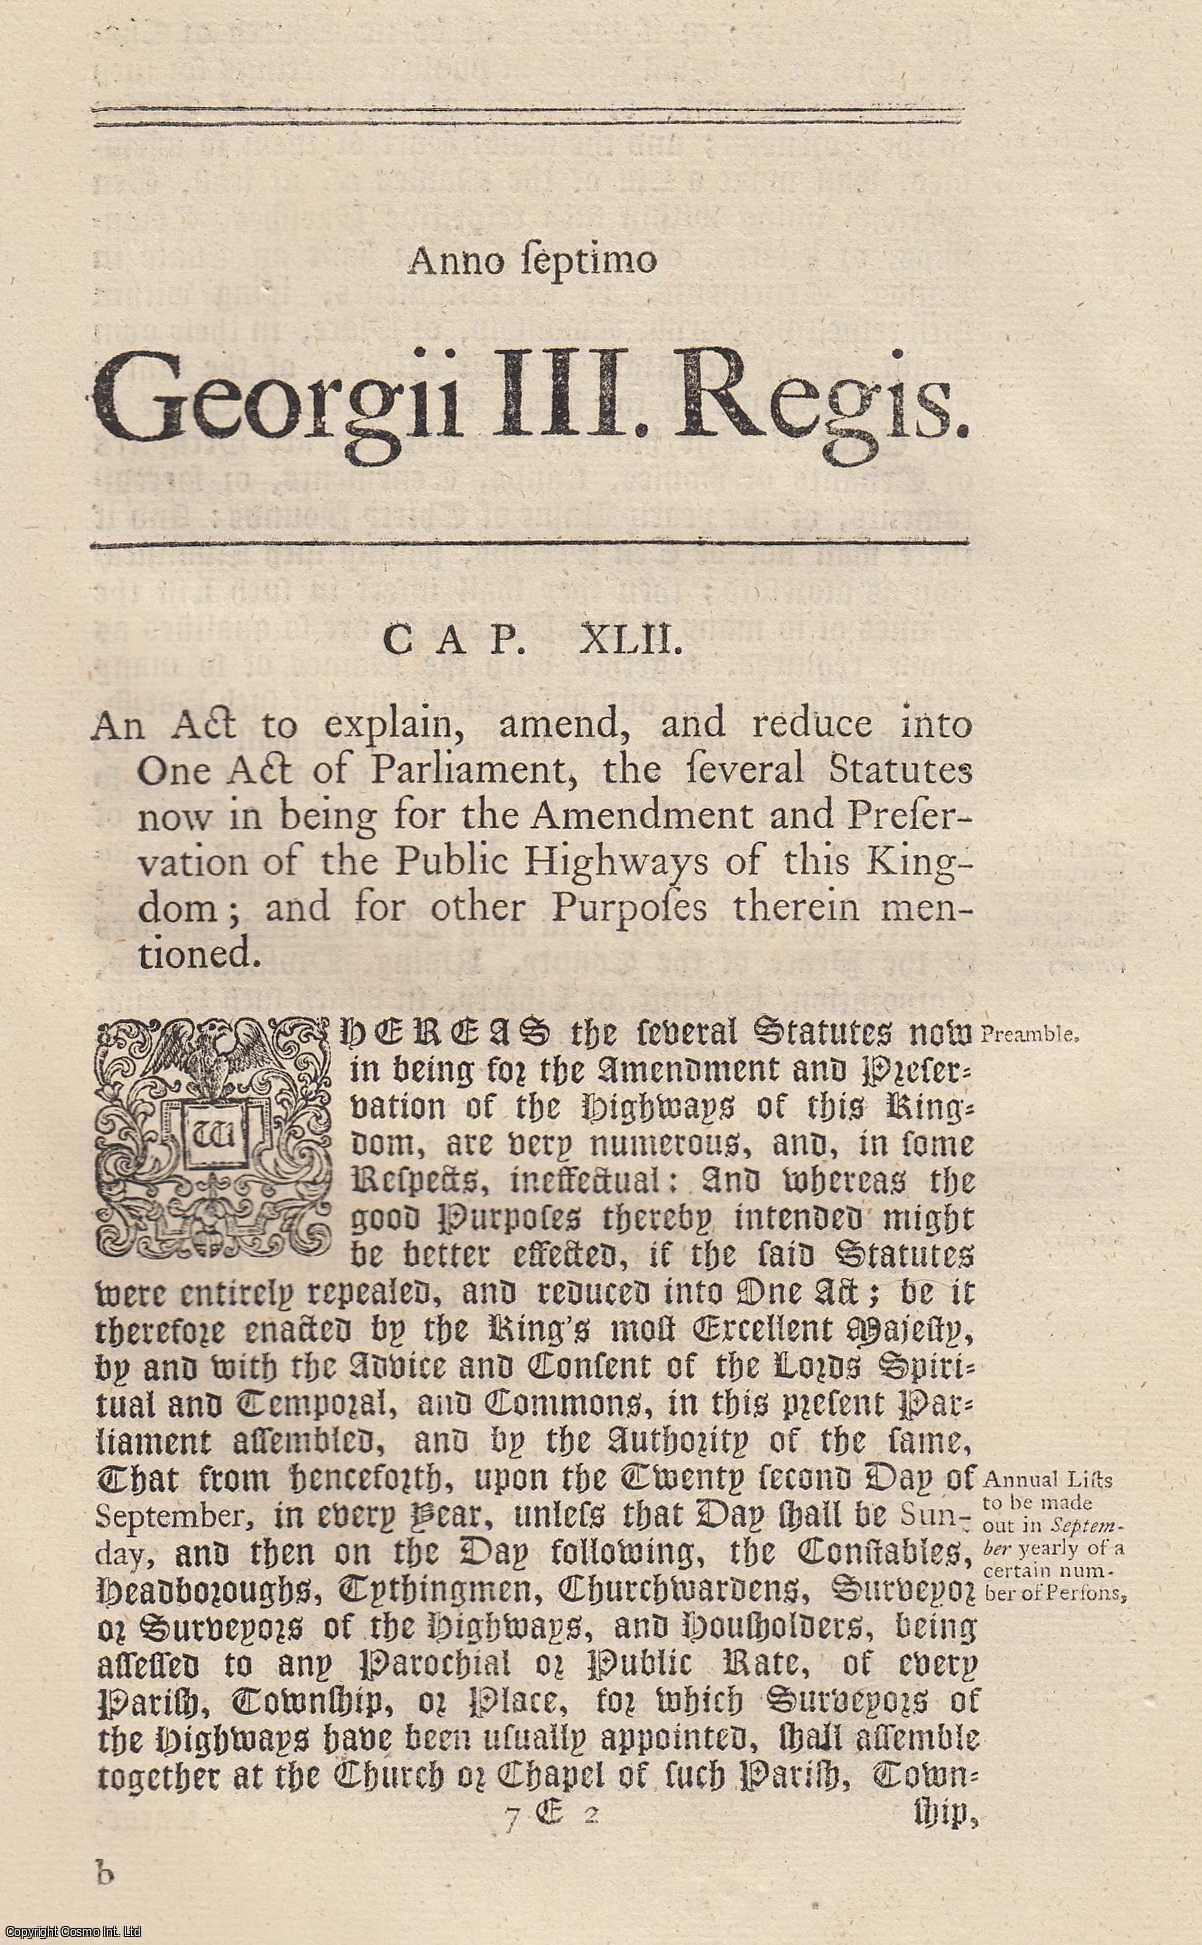 King George III - 1767. Cap. Xlii. An Act for The Several Statutes now in being for The Amendment and Preservation of The Public Highways of this Kingdom.